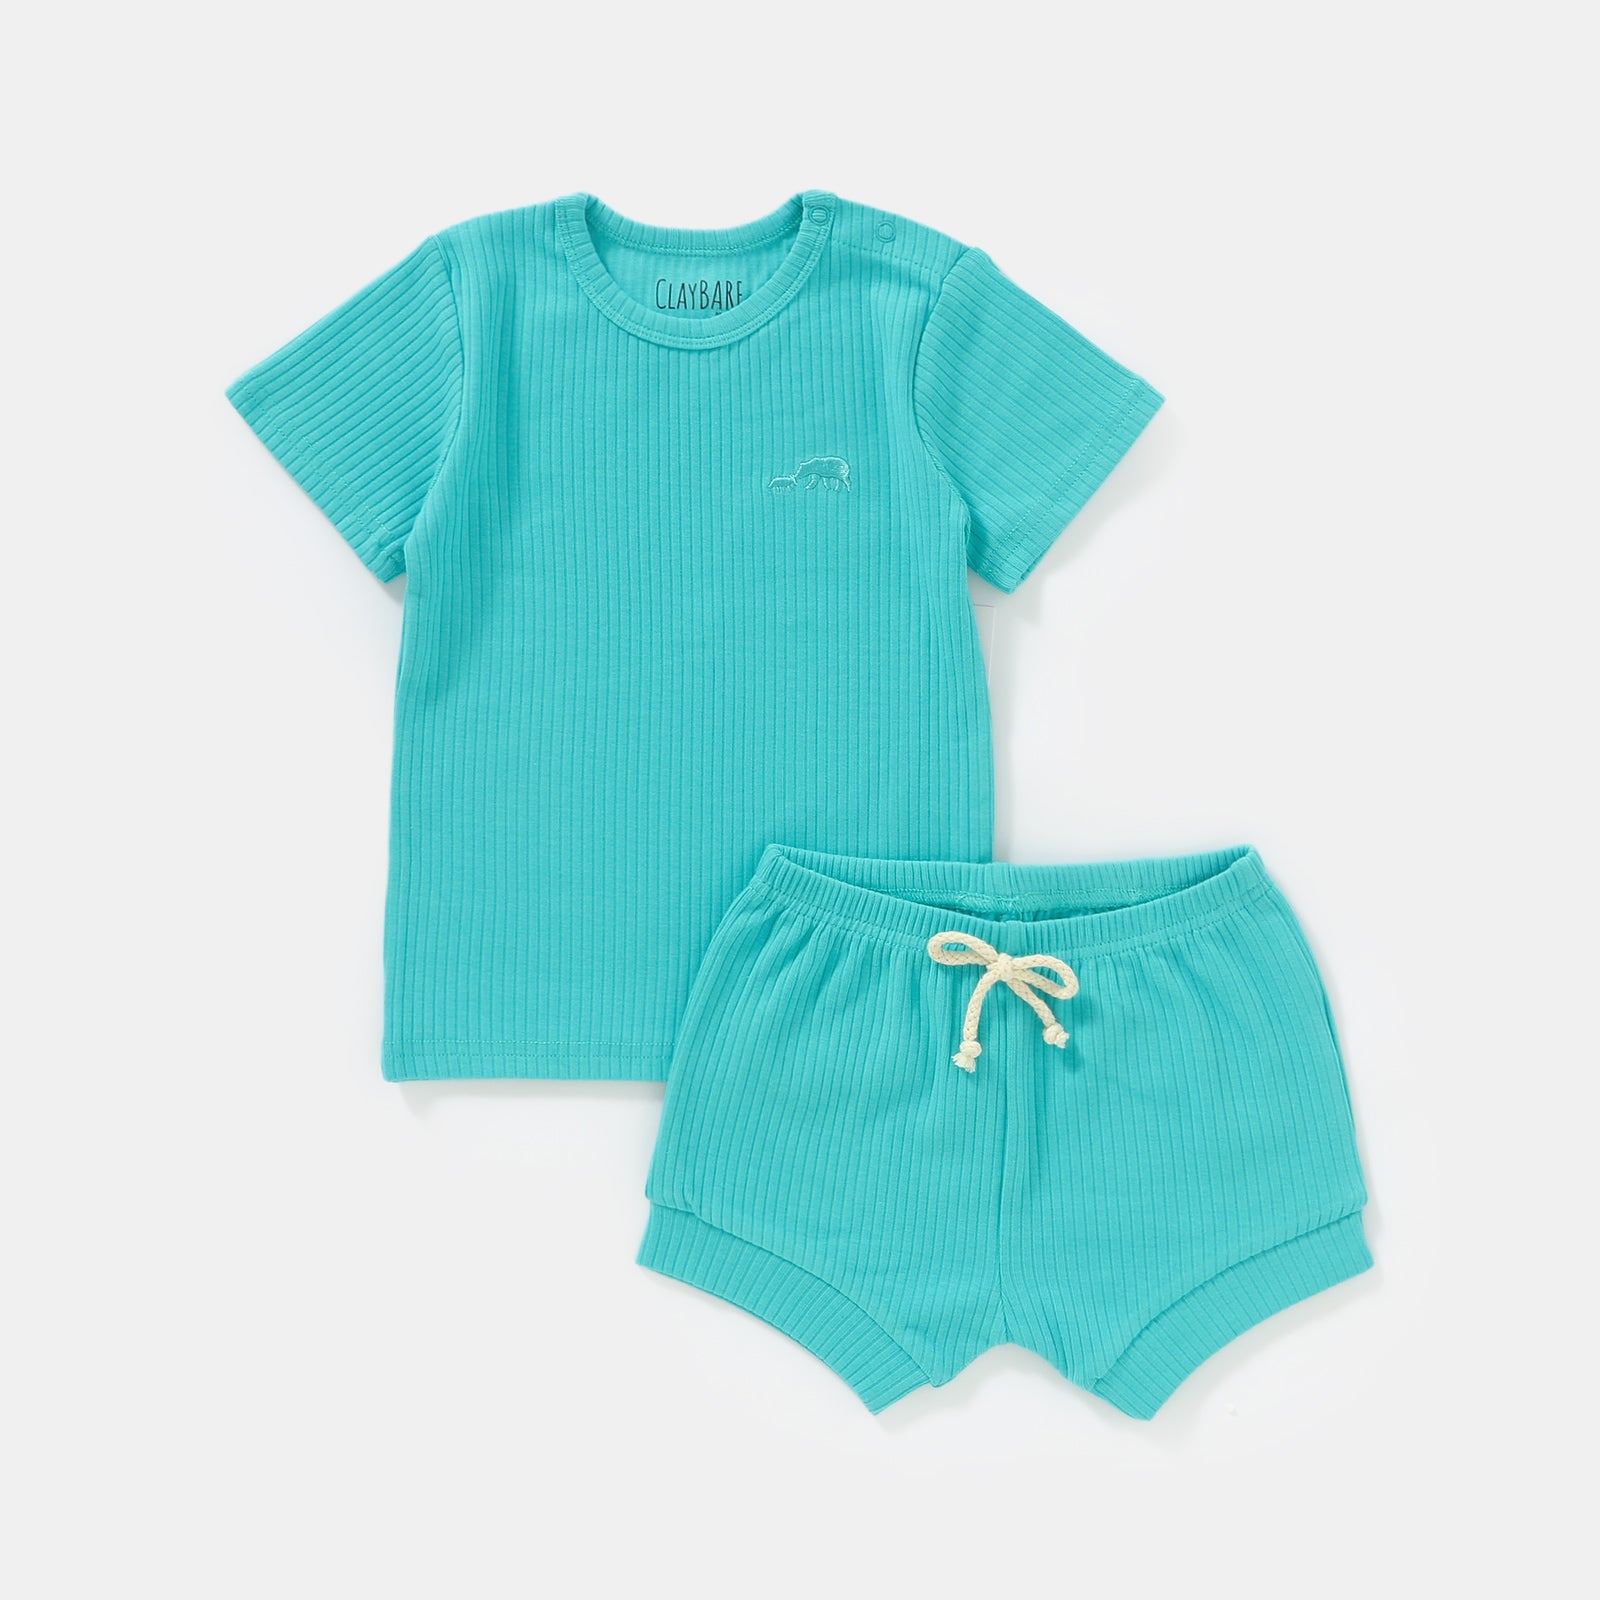 Teal Ribbed Short Sleeve Top (Top Only)